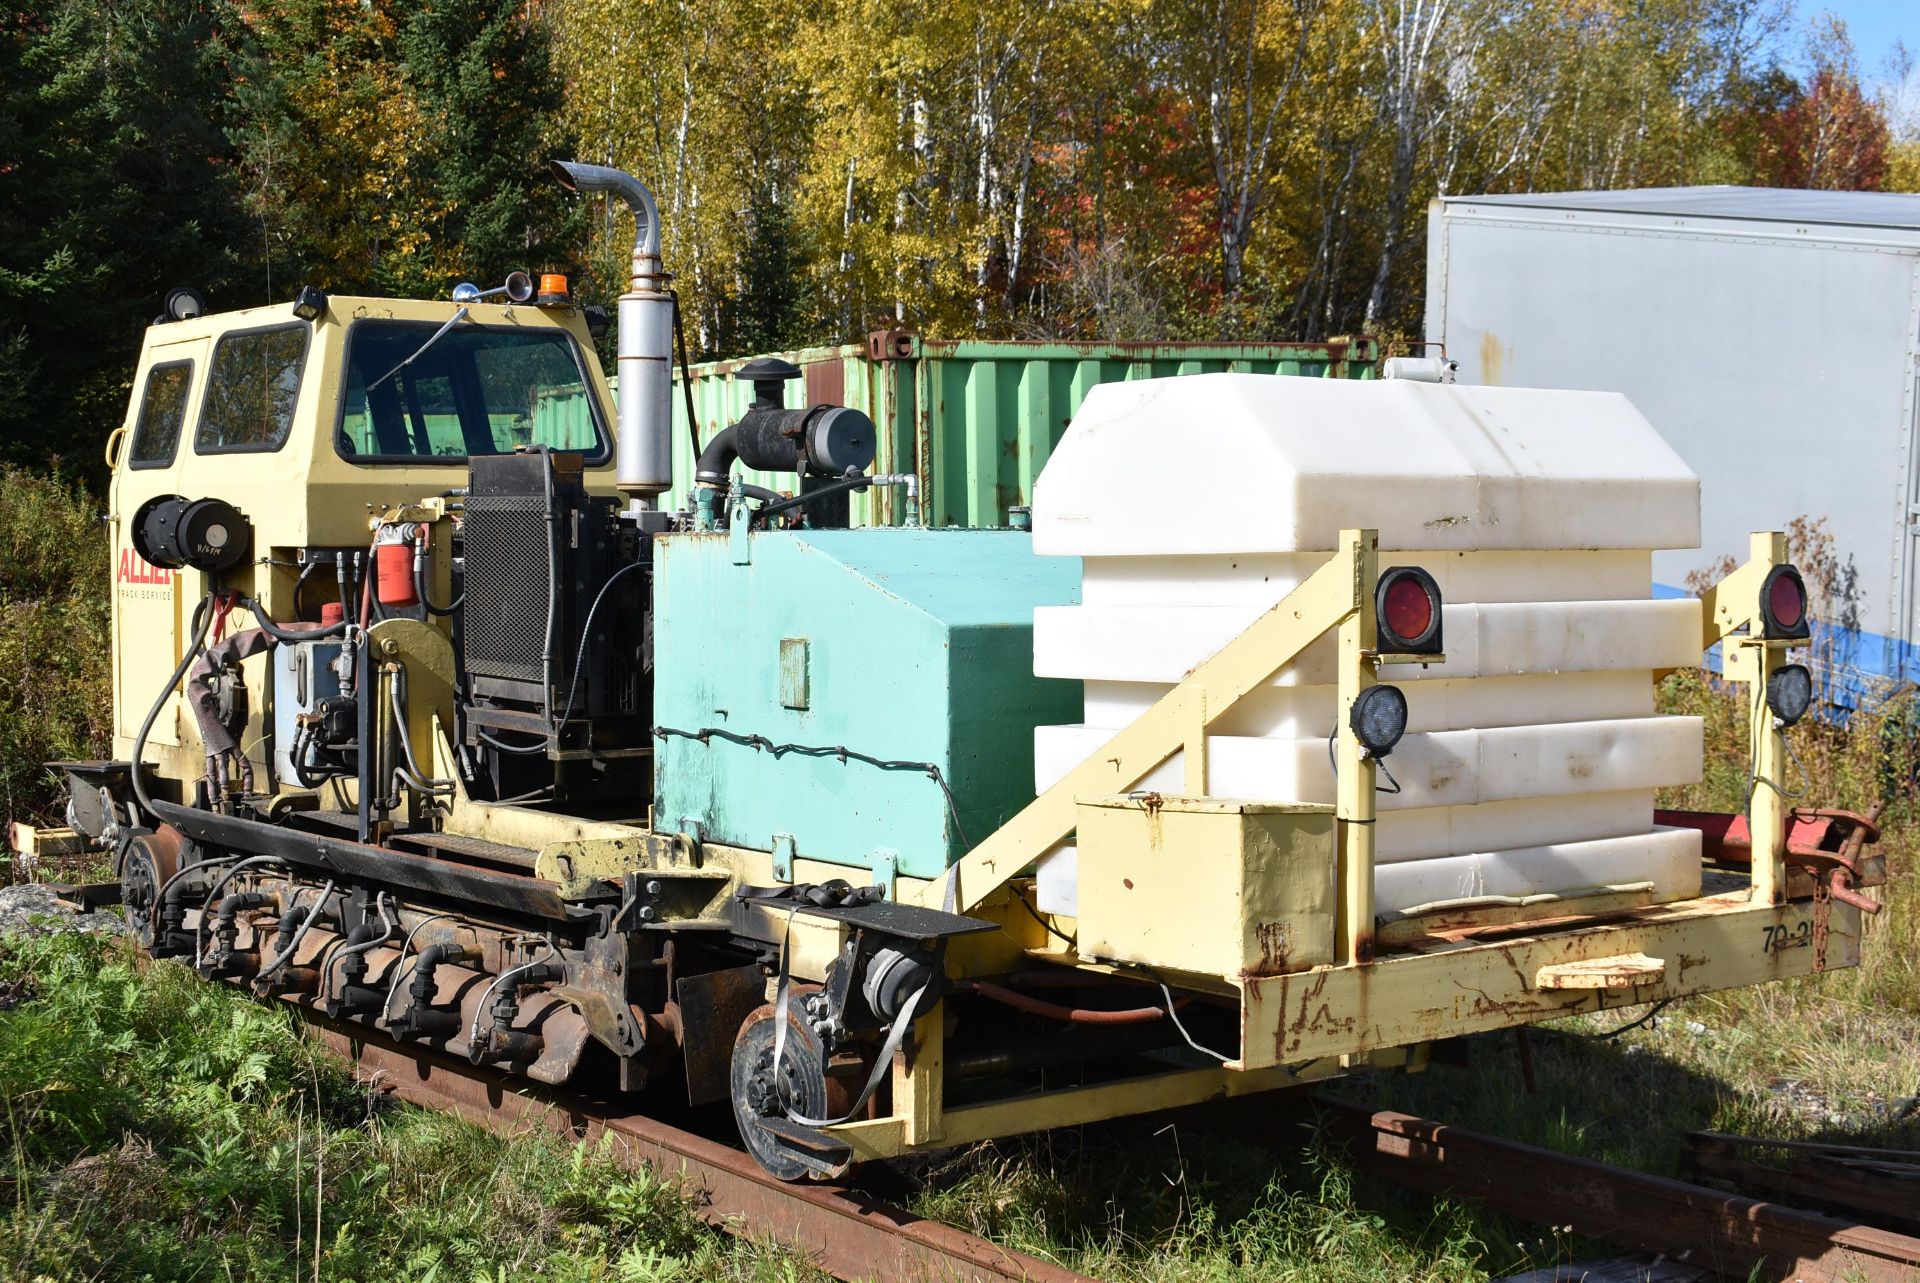 NORTH SELF PROPPELED RAIL HEATER WITH JOHN DEERE DIESEL ENGINE, CAB, HEATER CONTROLS, S/N N/A (70- - Image 4 of 8